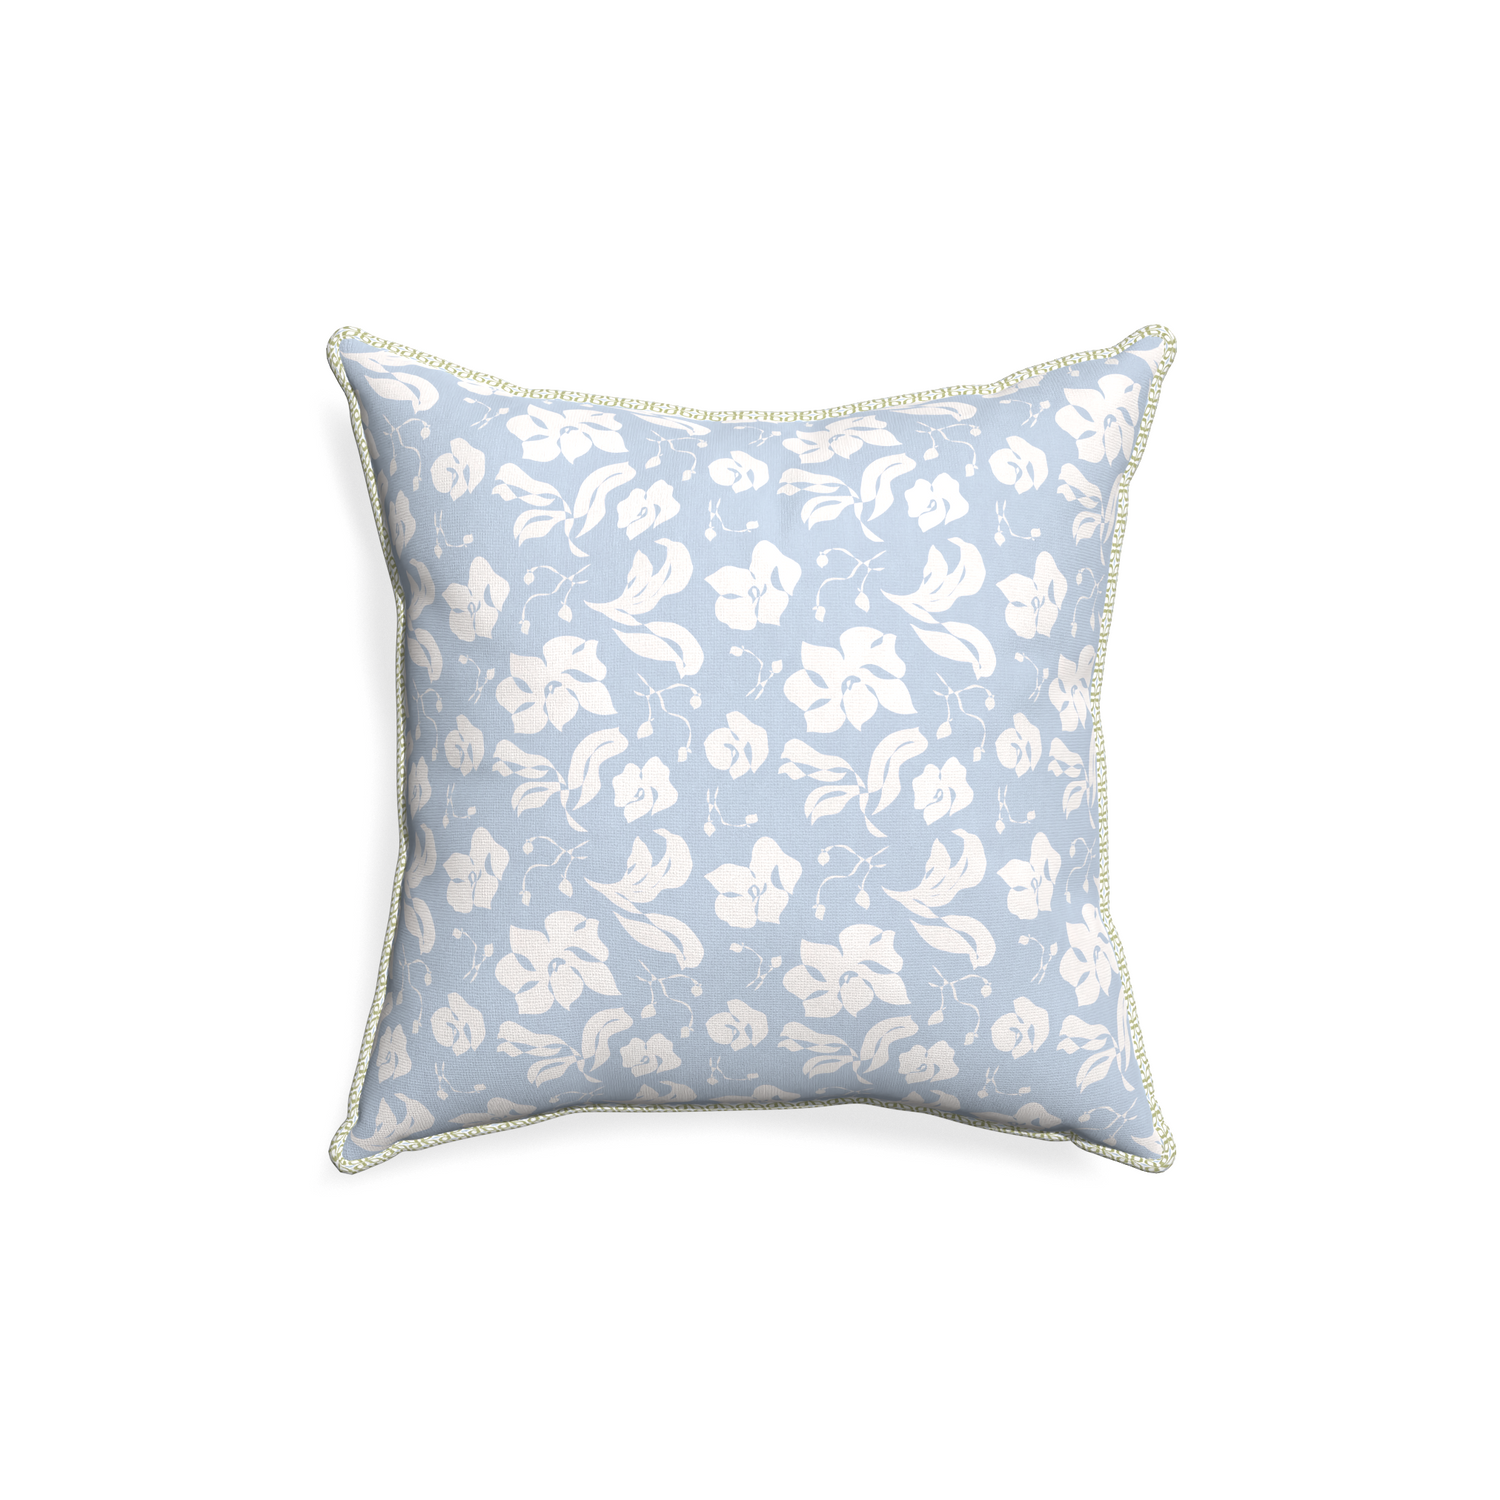 18-square georgia custom pillow with l piping on white background